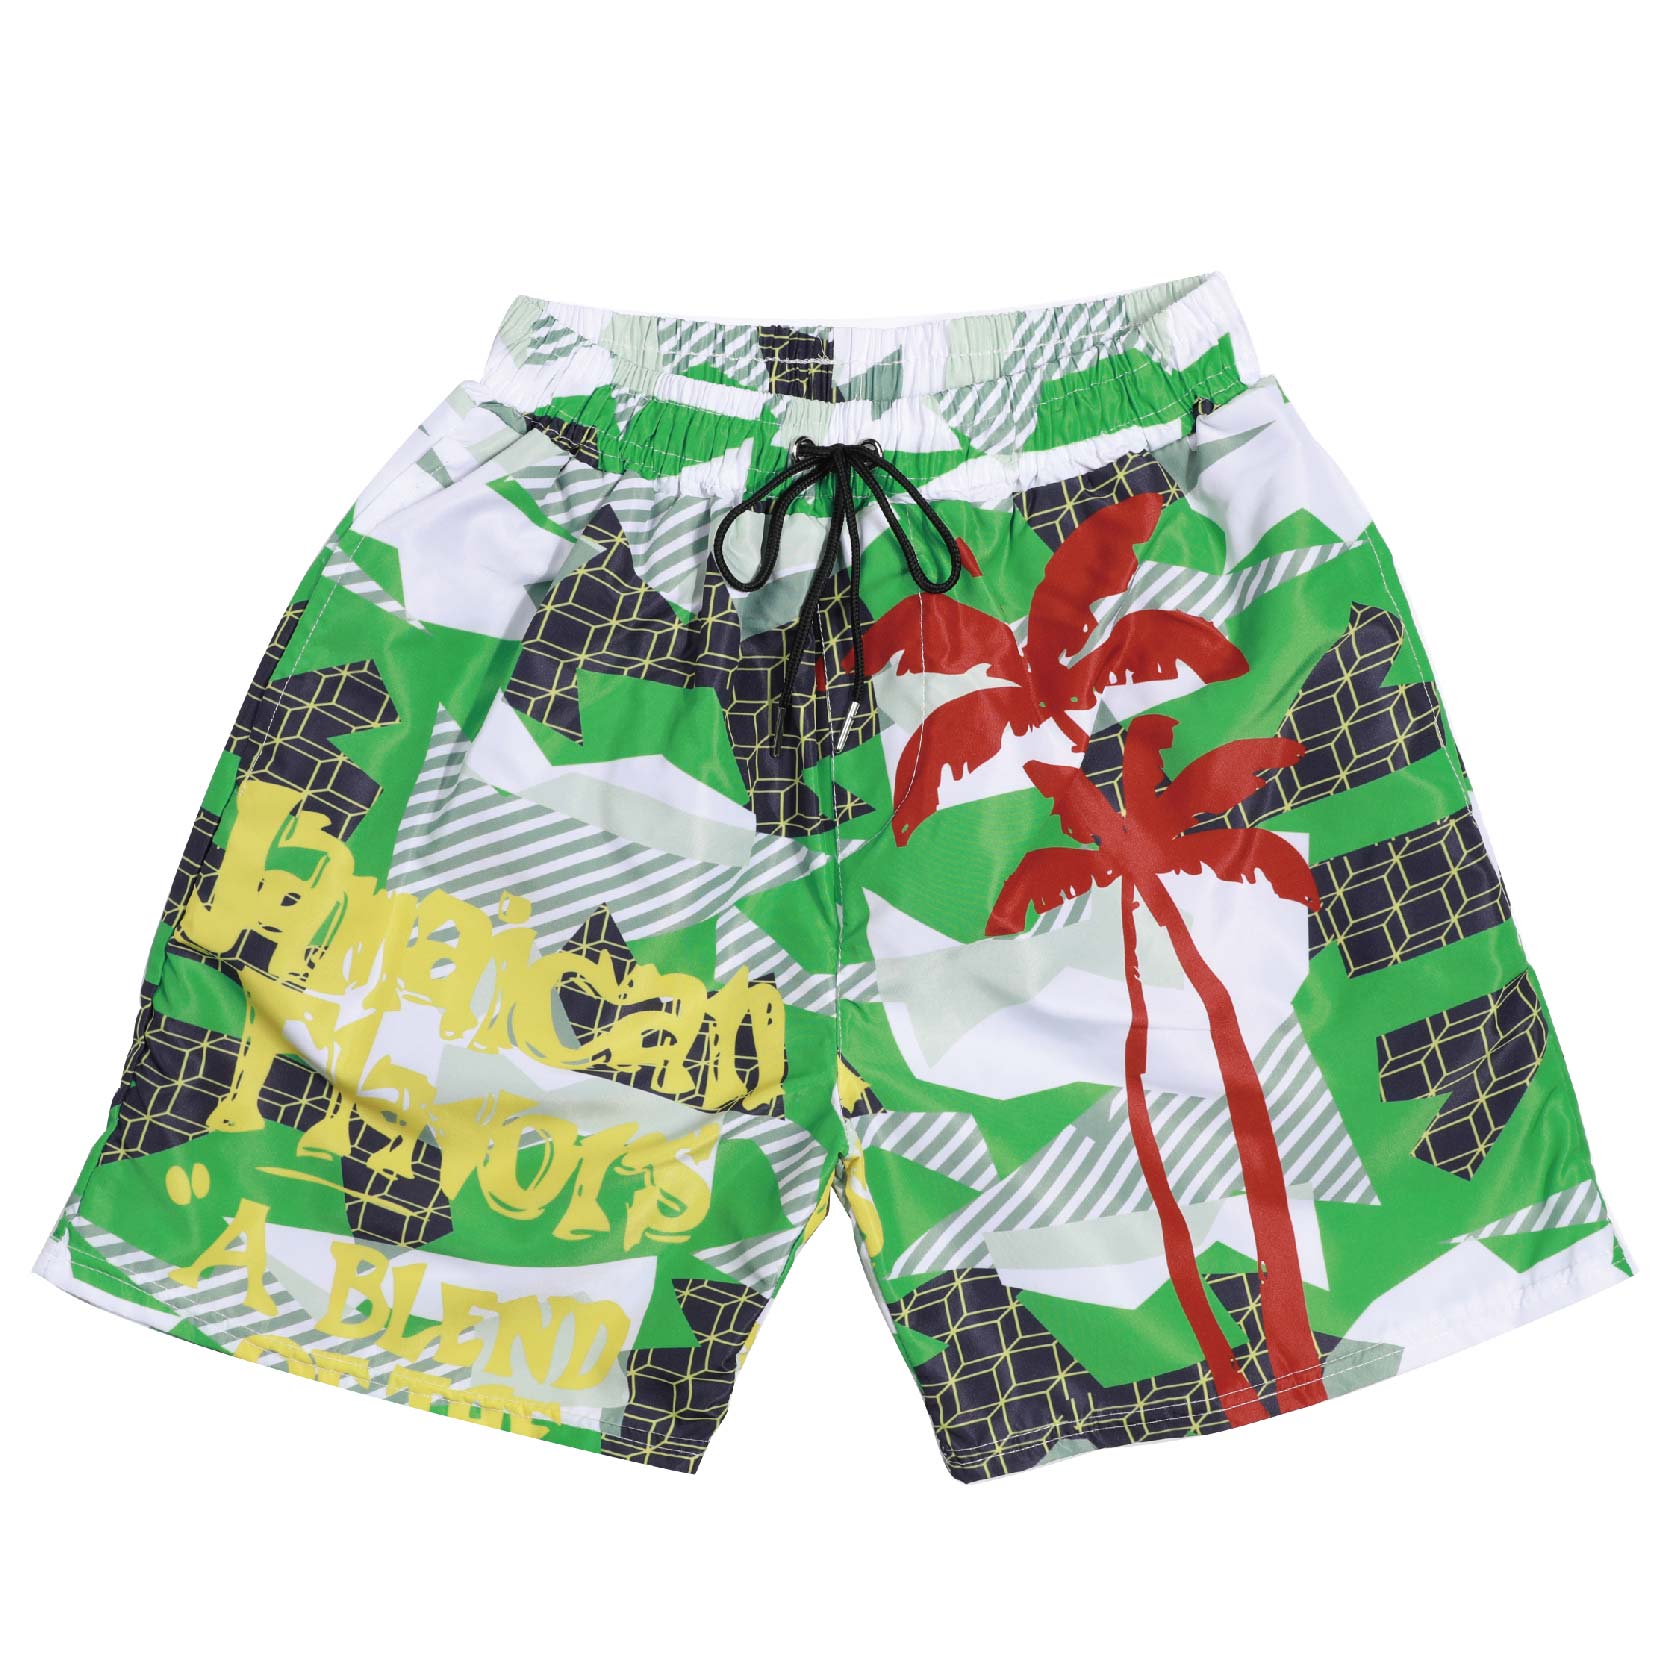 One of Hottest for Ripped Denim Jeans - Ngozi Beach Shorts Men Quick Dry Coconut Tree  Printed Elastic Waist （Green） – Fullerton